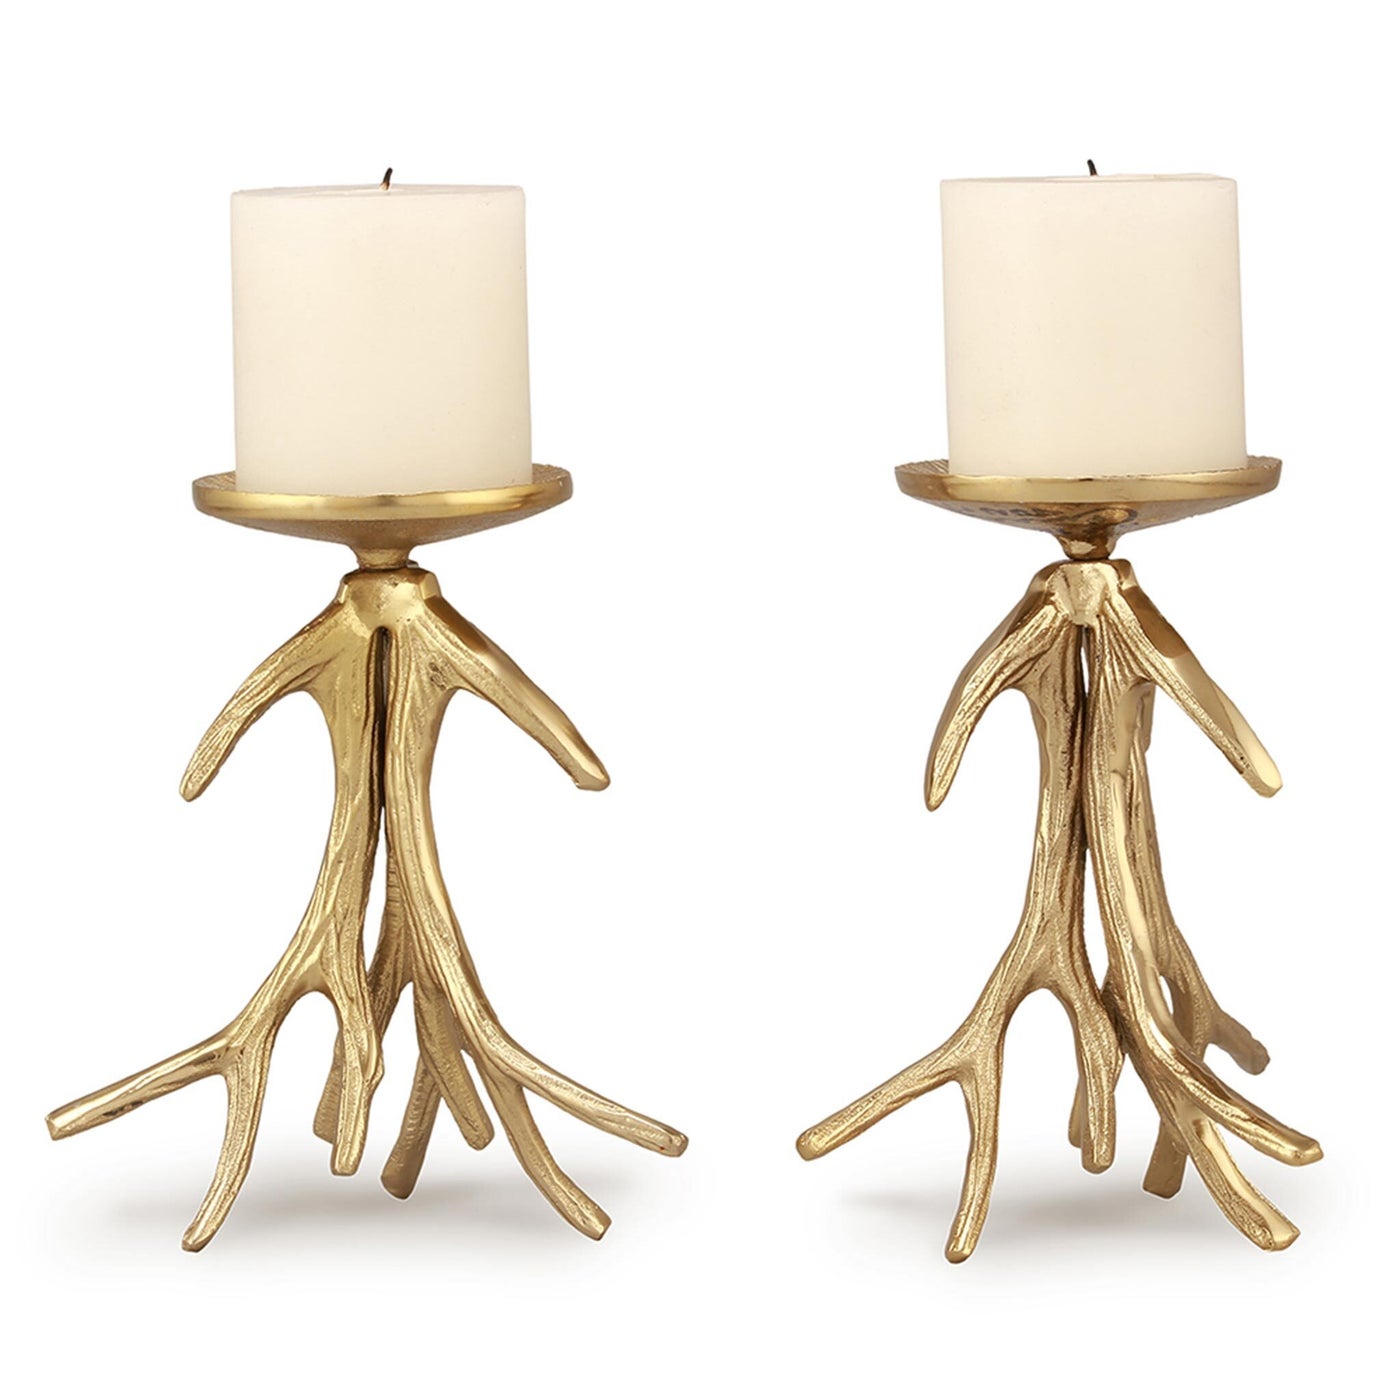 Antler Candle Holders